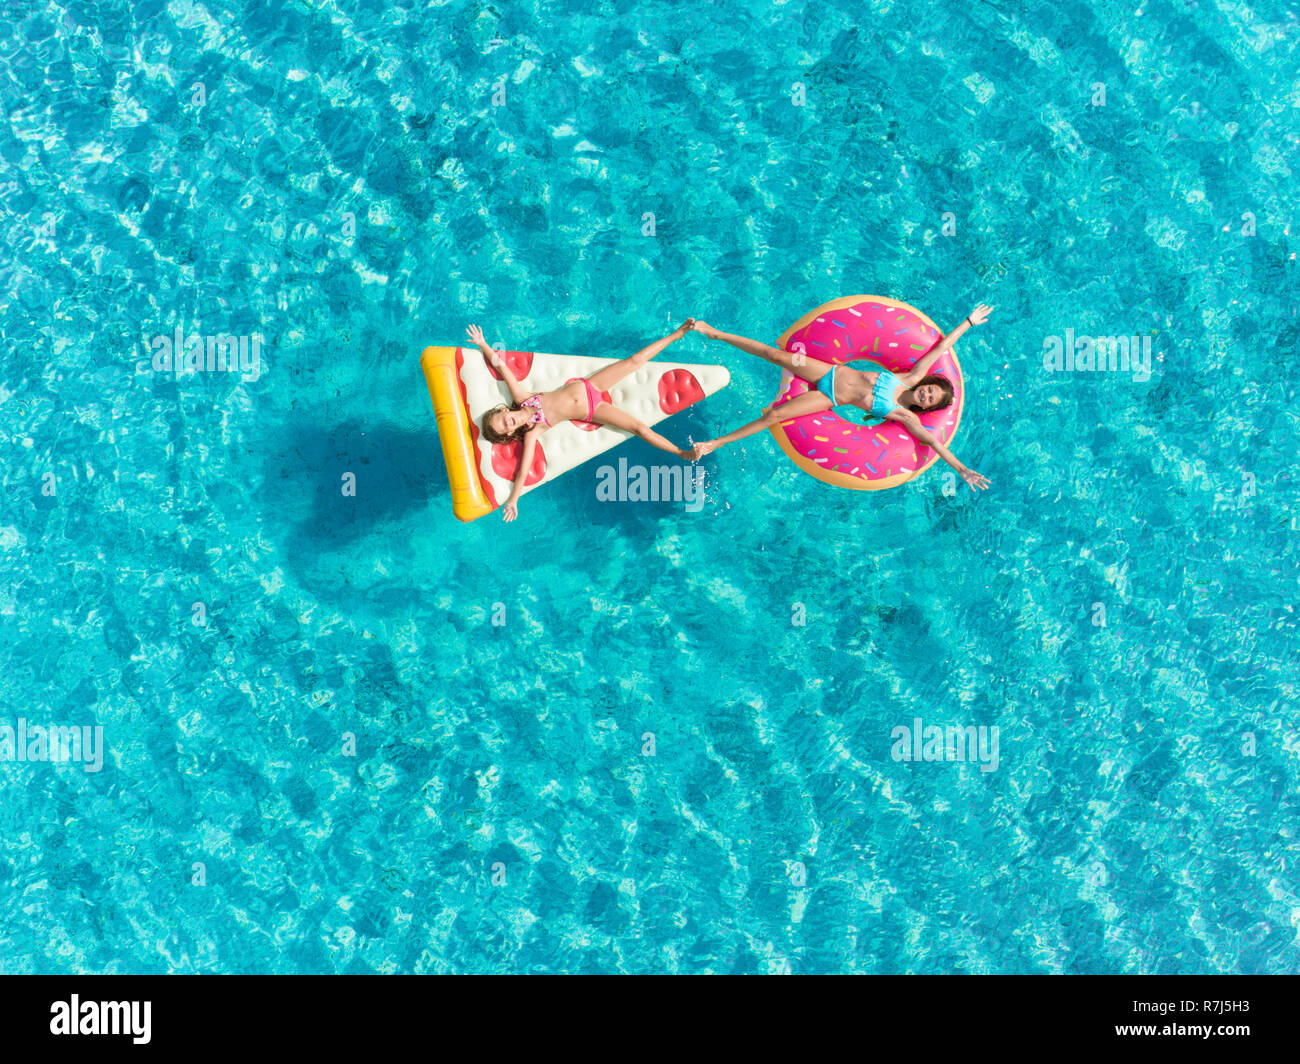 Aerial view of two young girls floating in sea on  pizza and donut shaped inflatables touching feet. Stock Photo